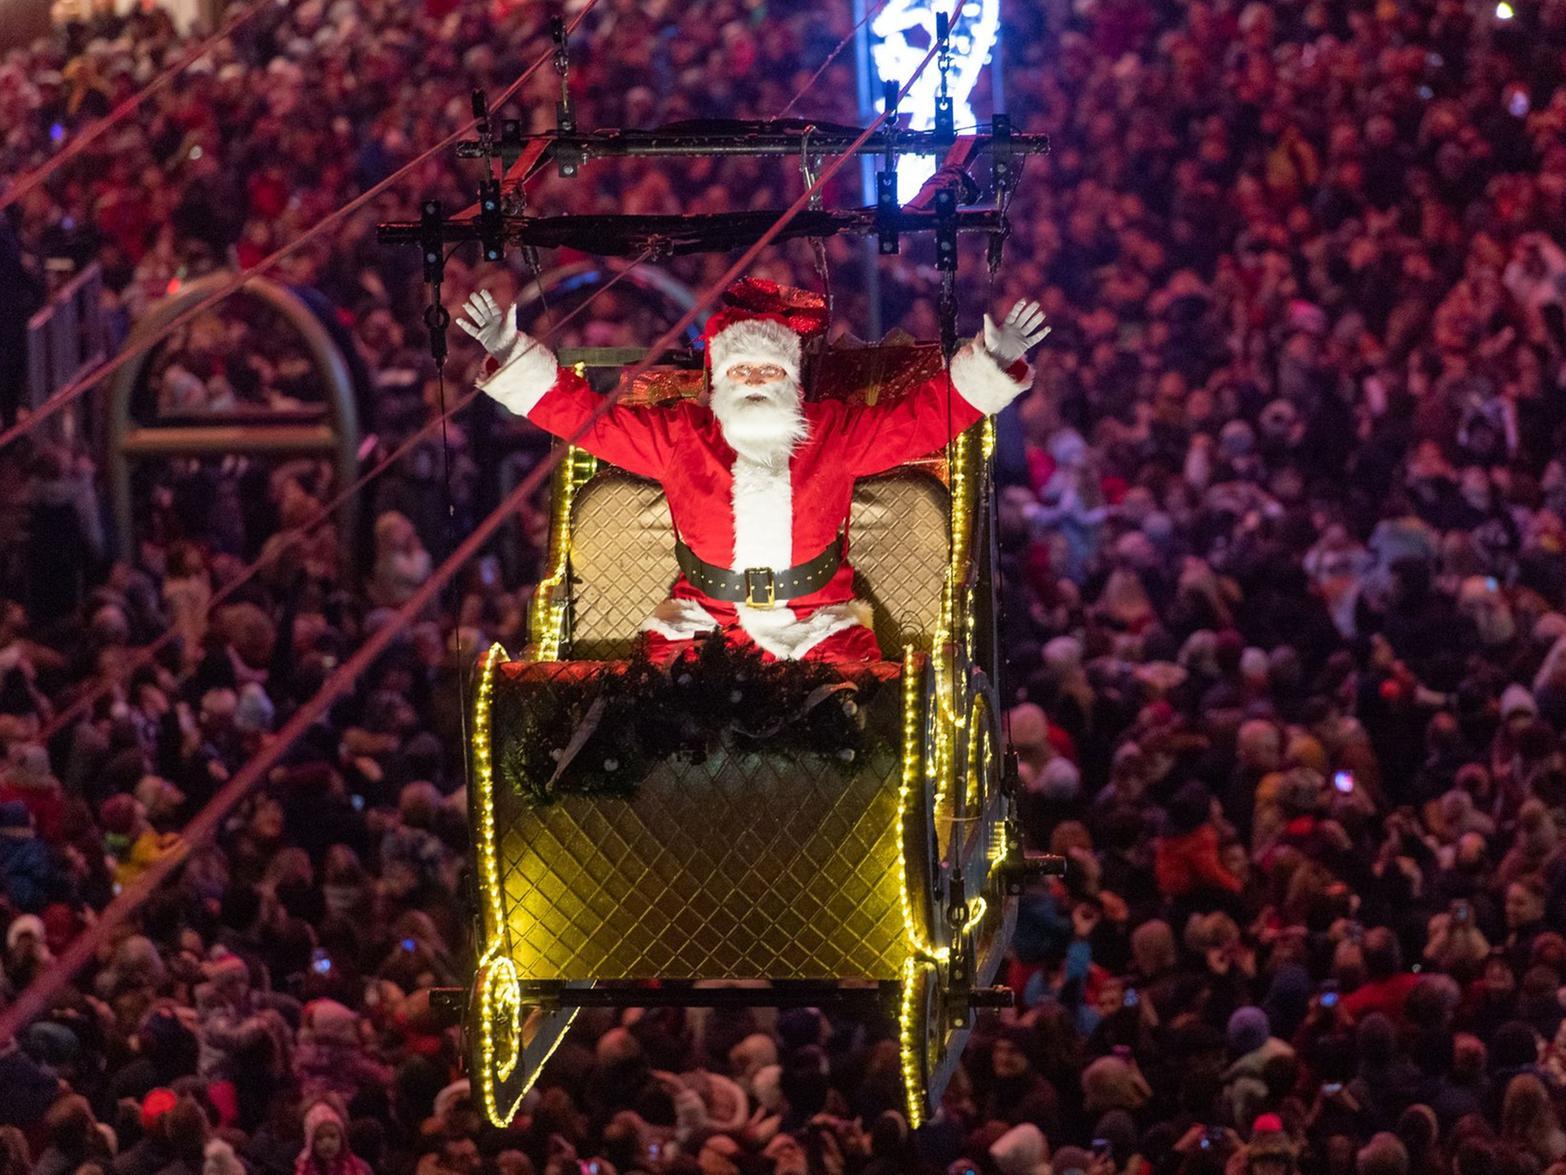 Even Santa Clause made a cameo appearance, as he flew up the Royal Mile in his magnificent sleigh, wowing the audience.